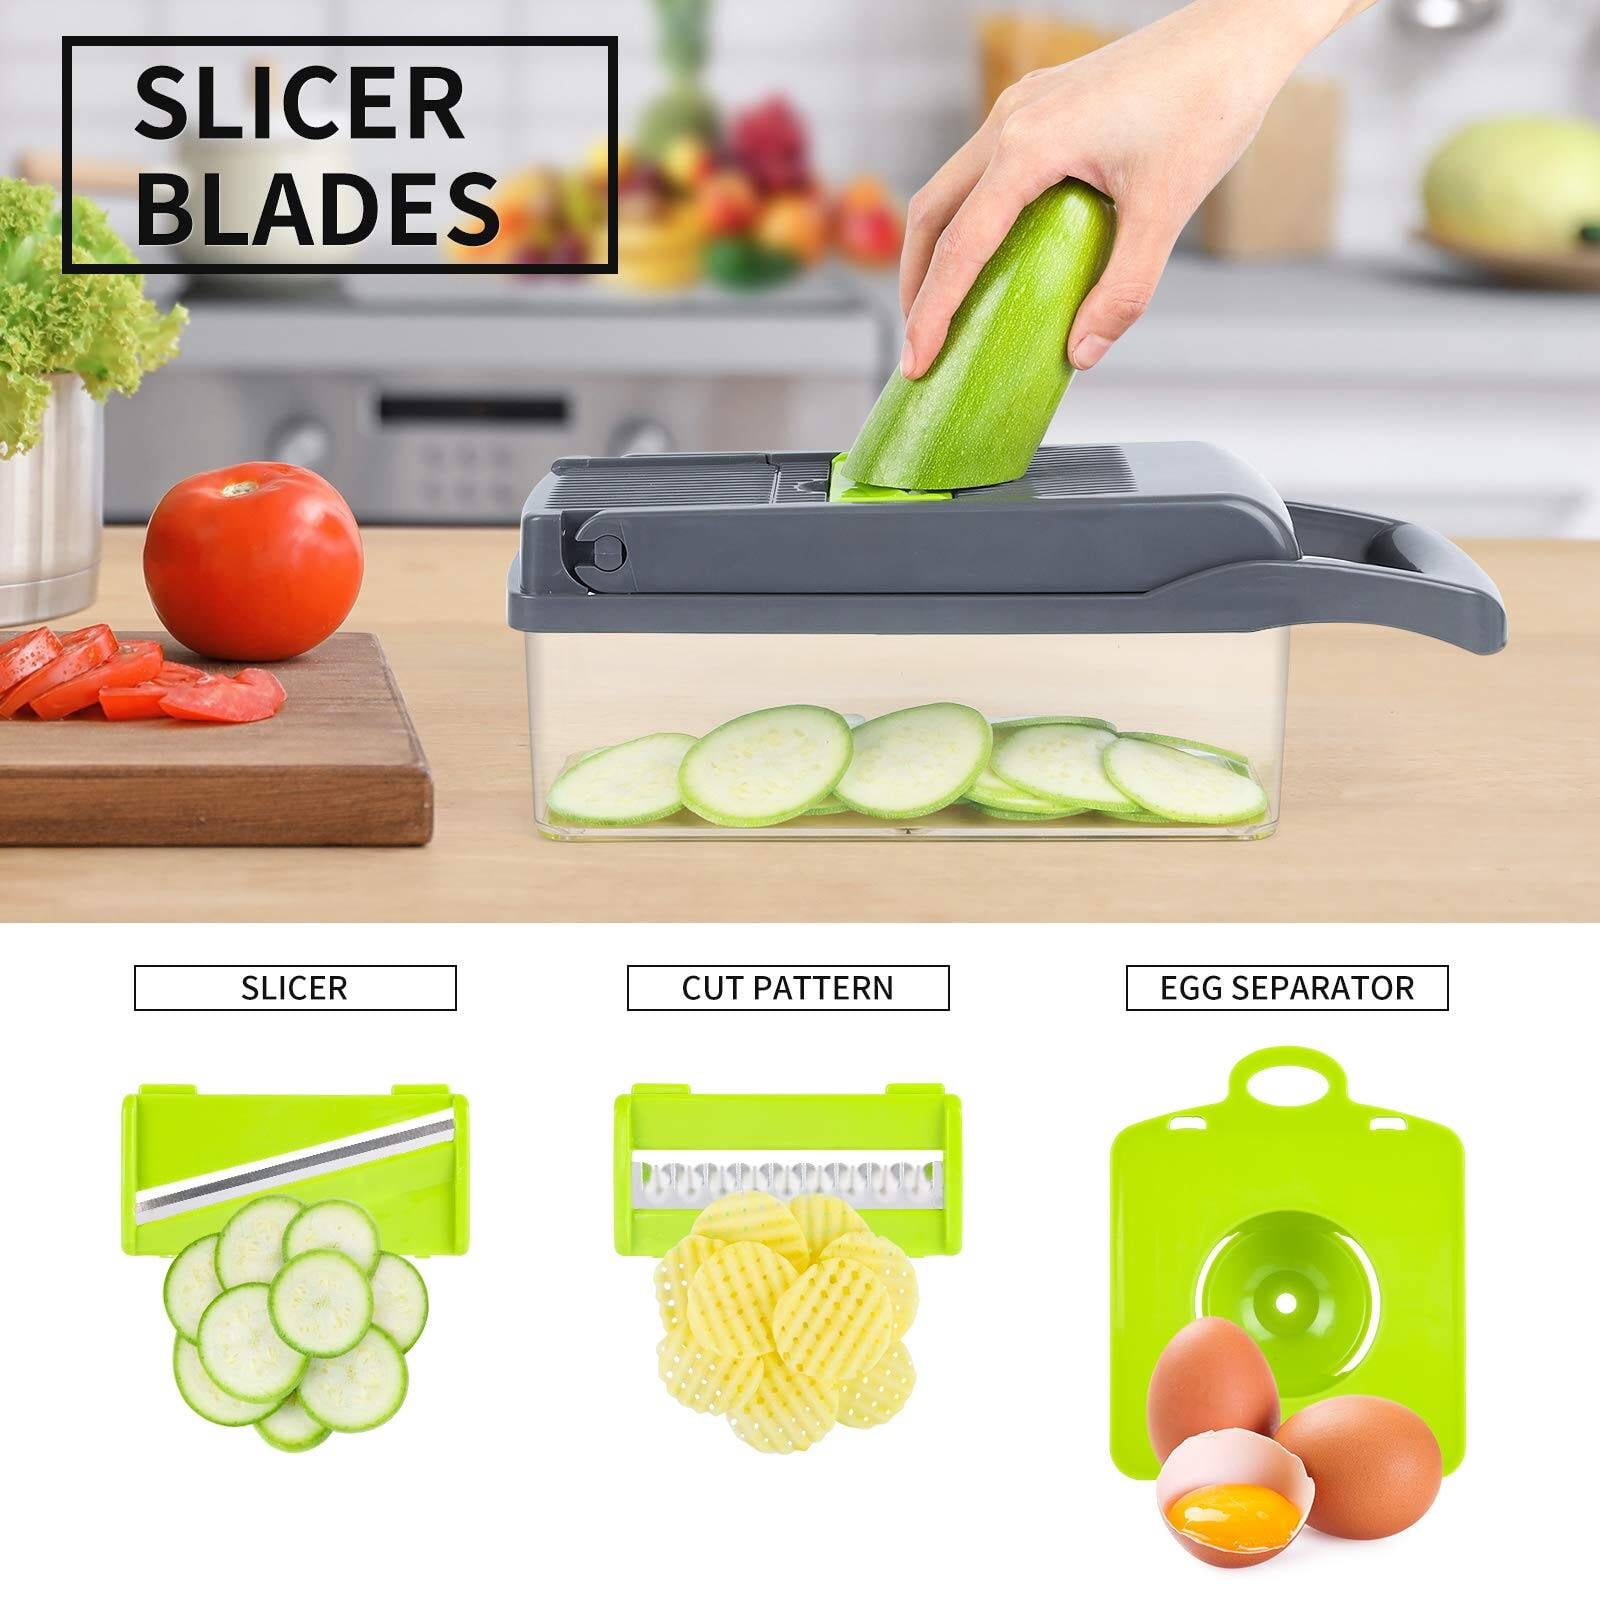 Cheer Collection Vegetable Chopper with Container - 10 in 1 Food Slicer  Vegetable Cutter with 8 Blades - Cheer Collection